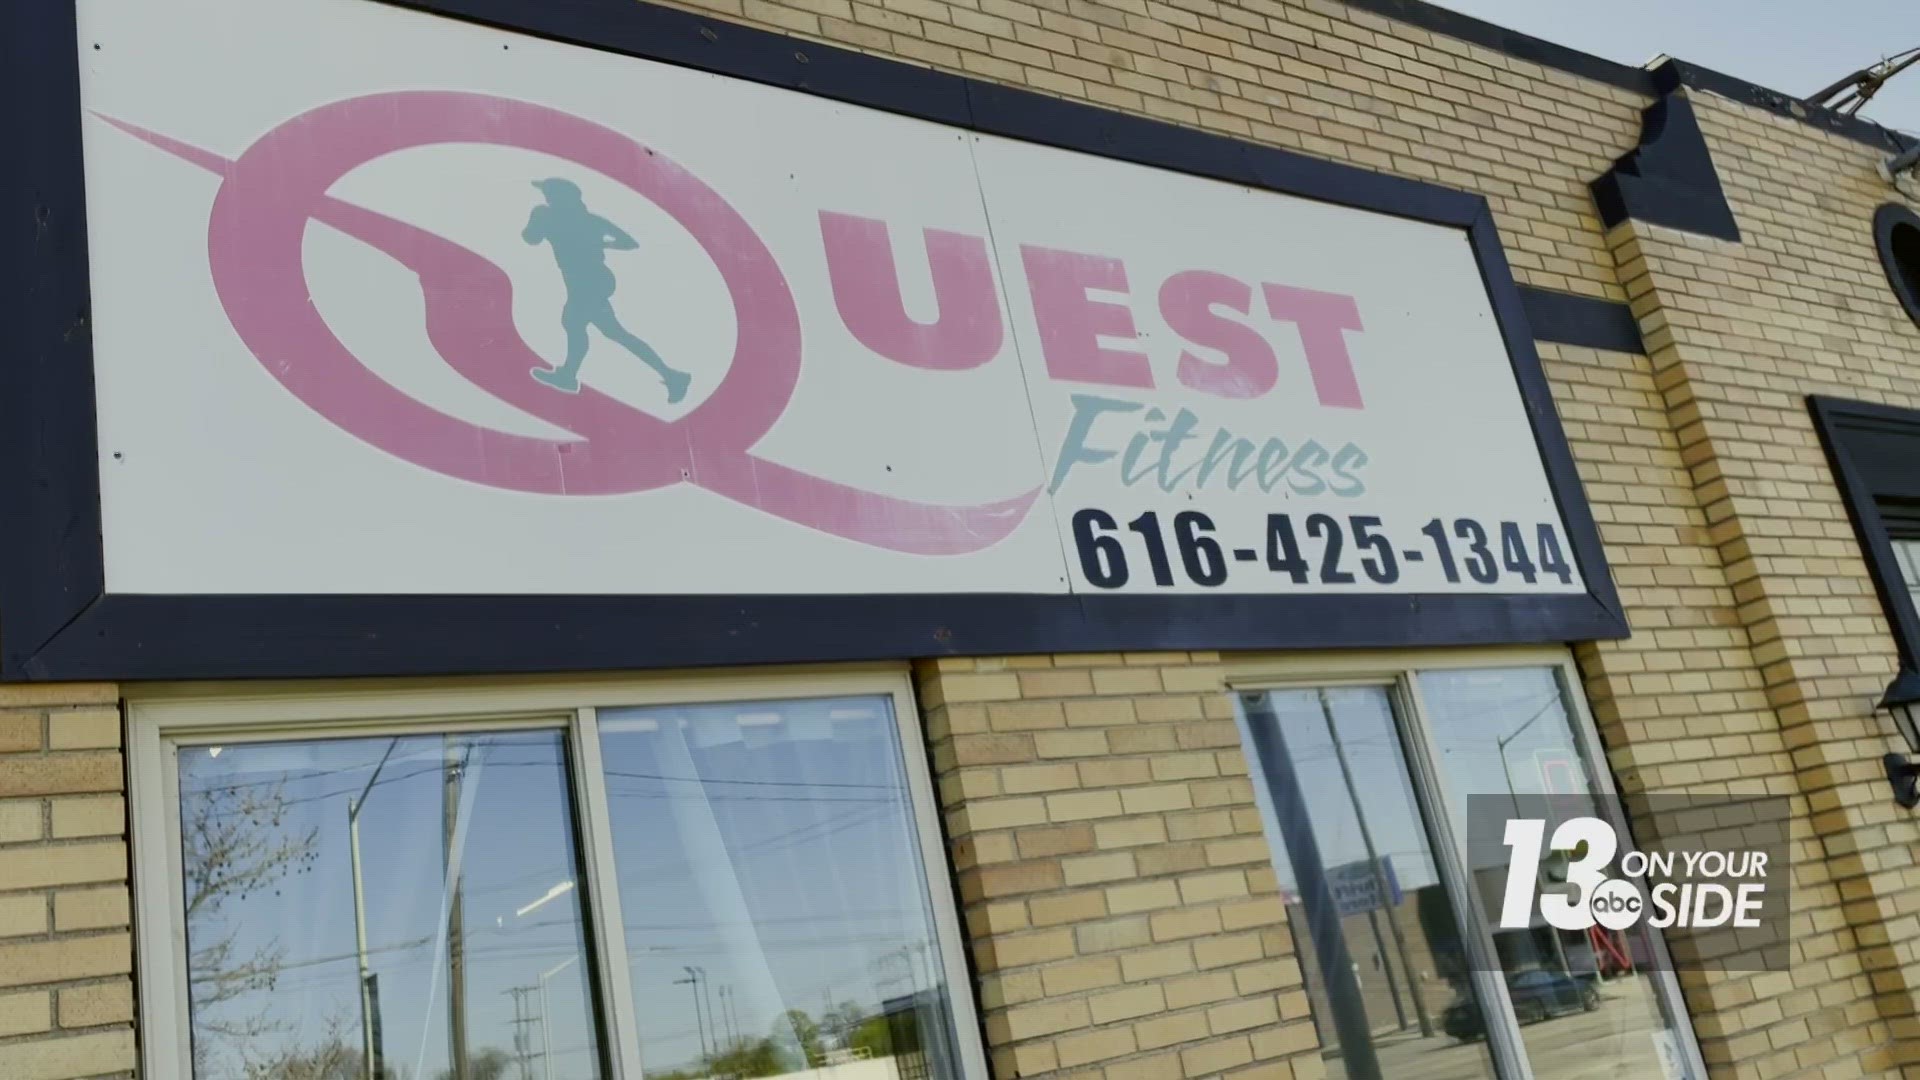 Shonk said Quest offers a variety of opportunities to its clients, whether taking classes or experiencing the guidance of a personal trainer.